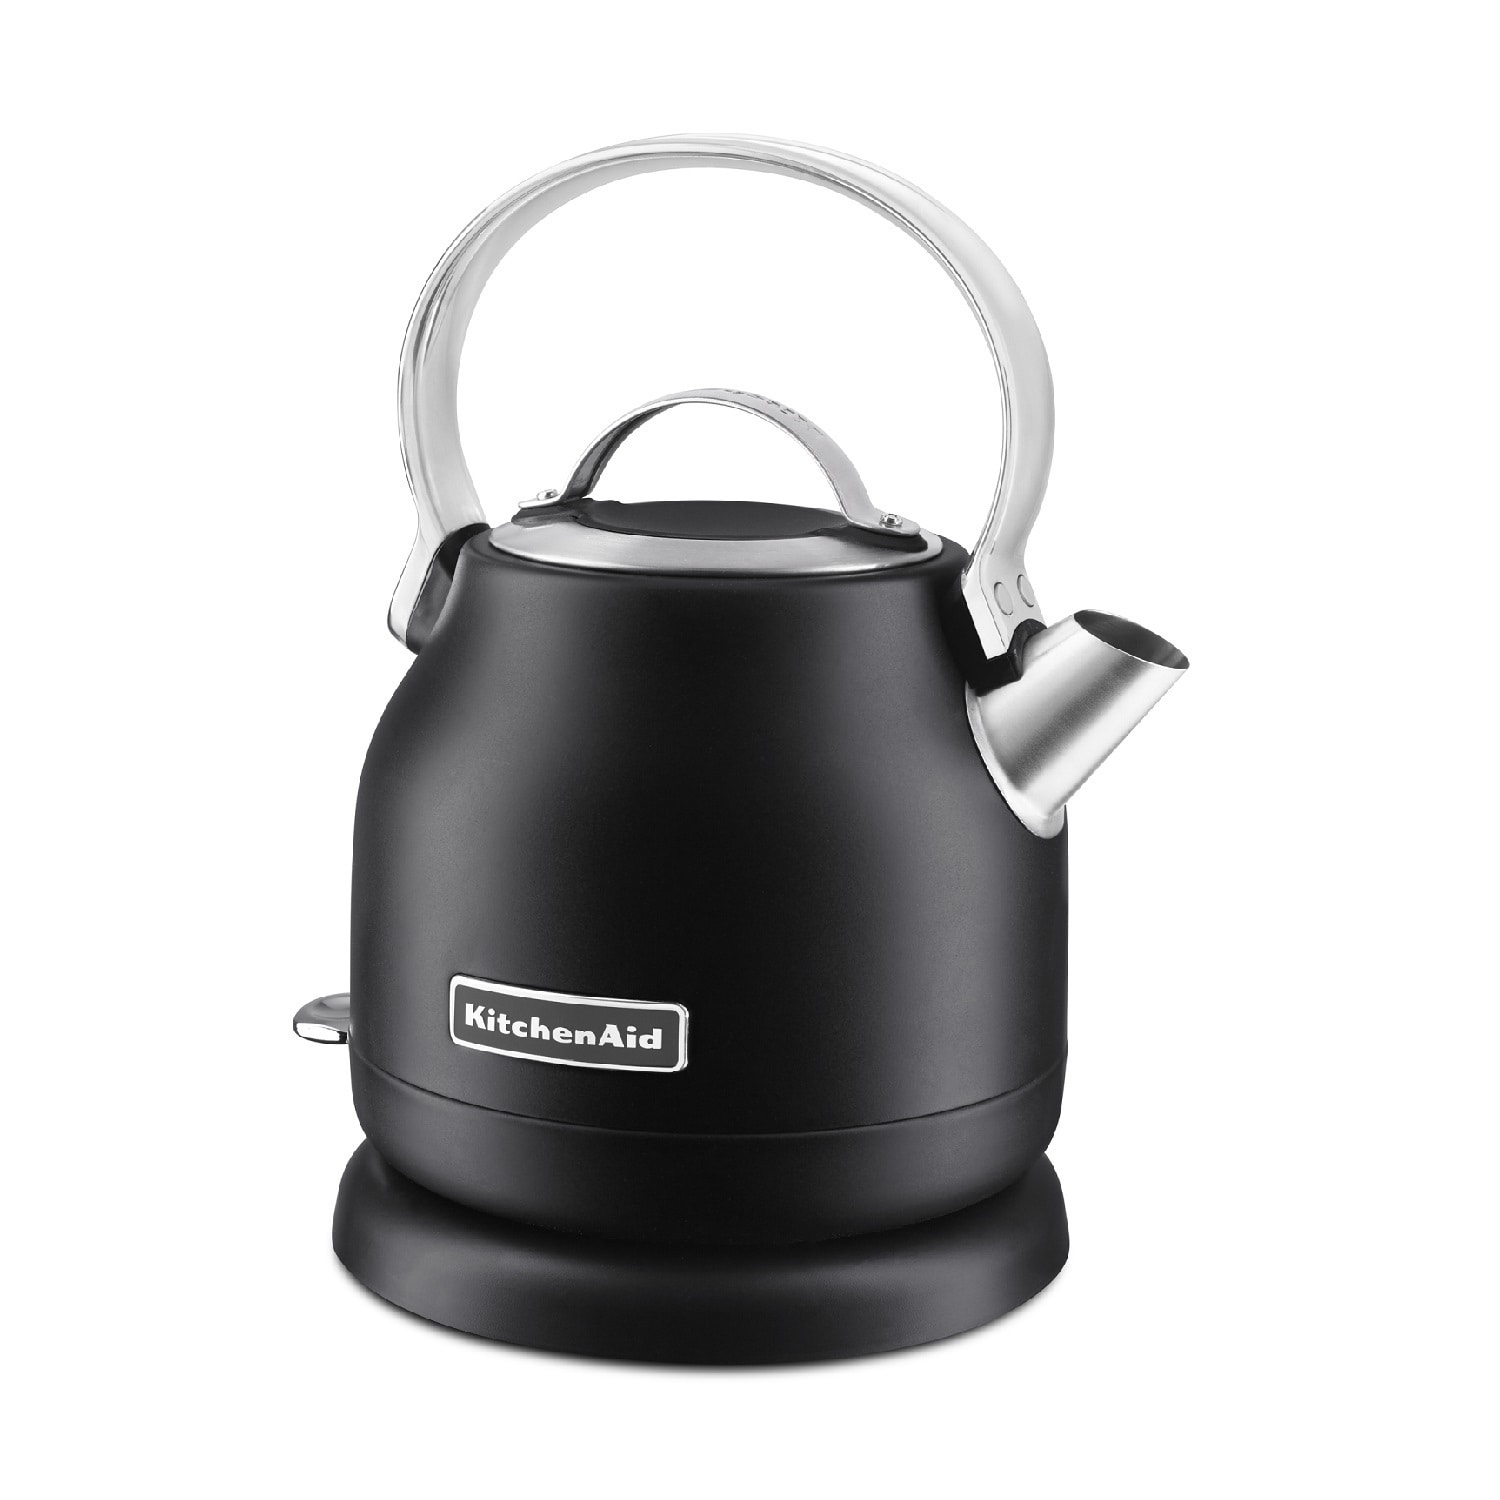 MegaChef 1.8 Liter Half Circle Electric Tea Kettle with Thermostat in Matte Black